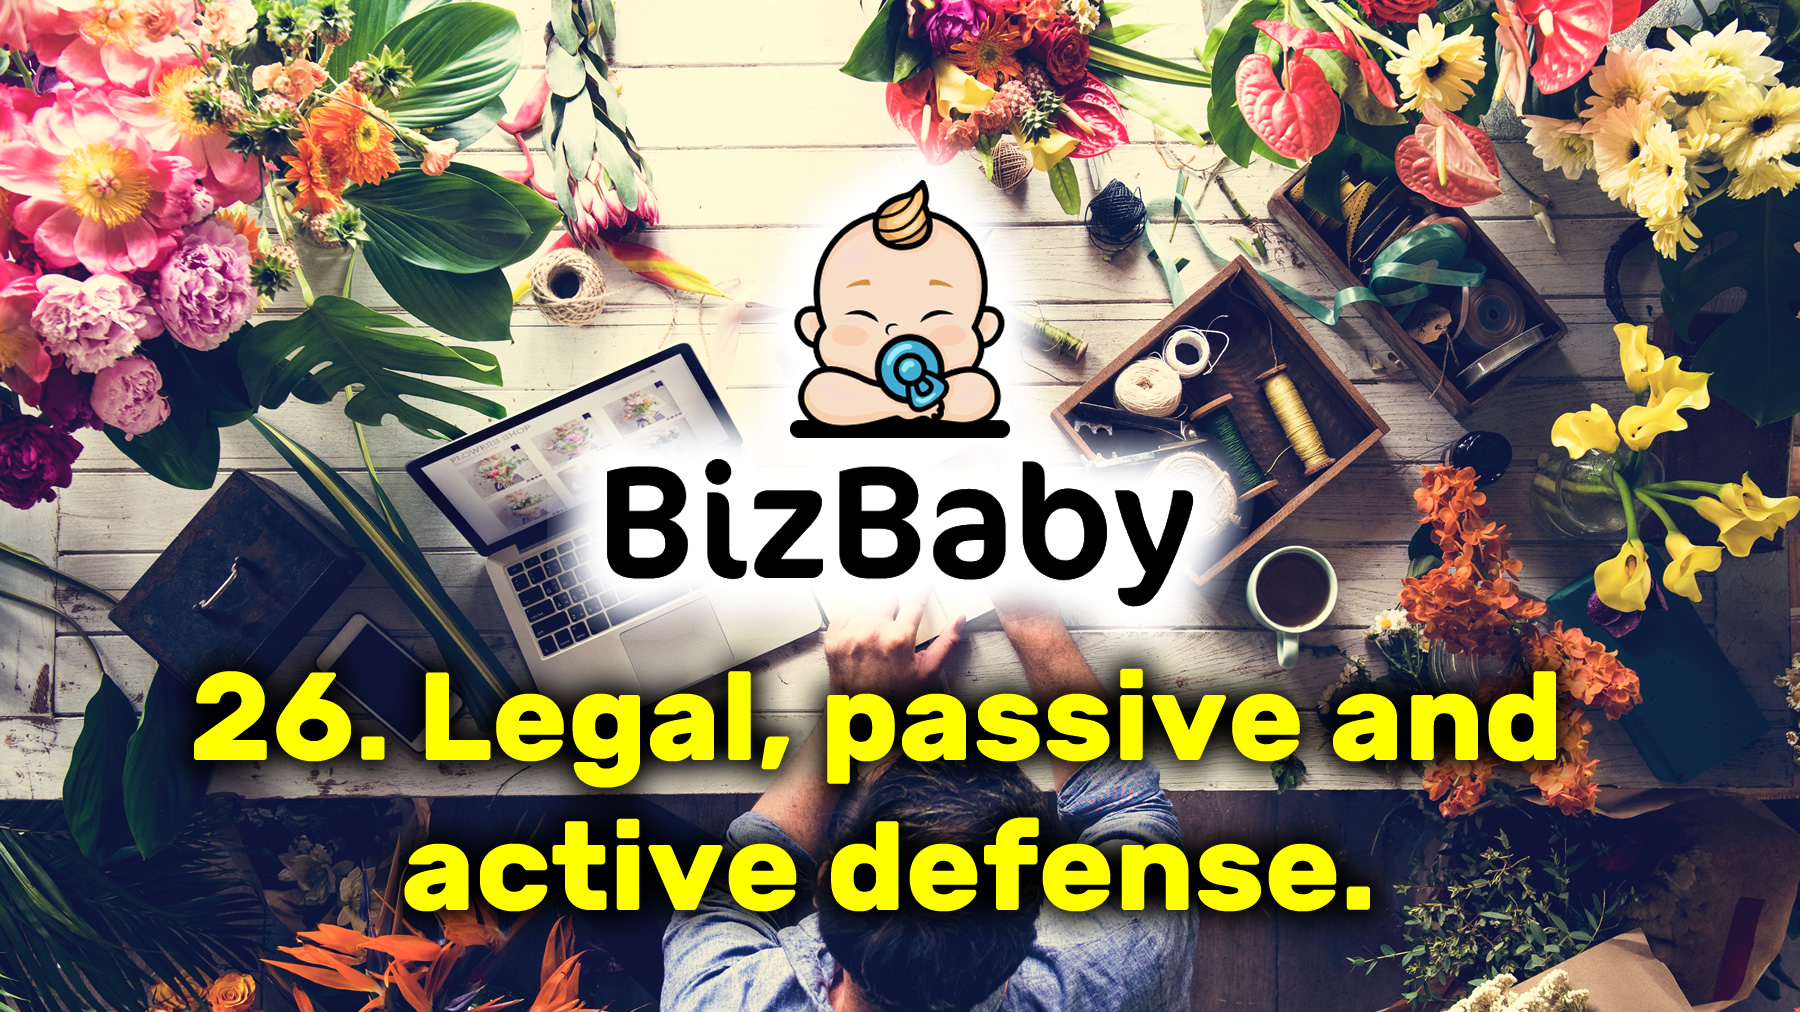 Legal, passive and active defense